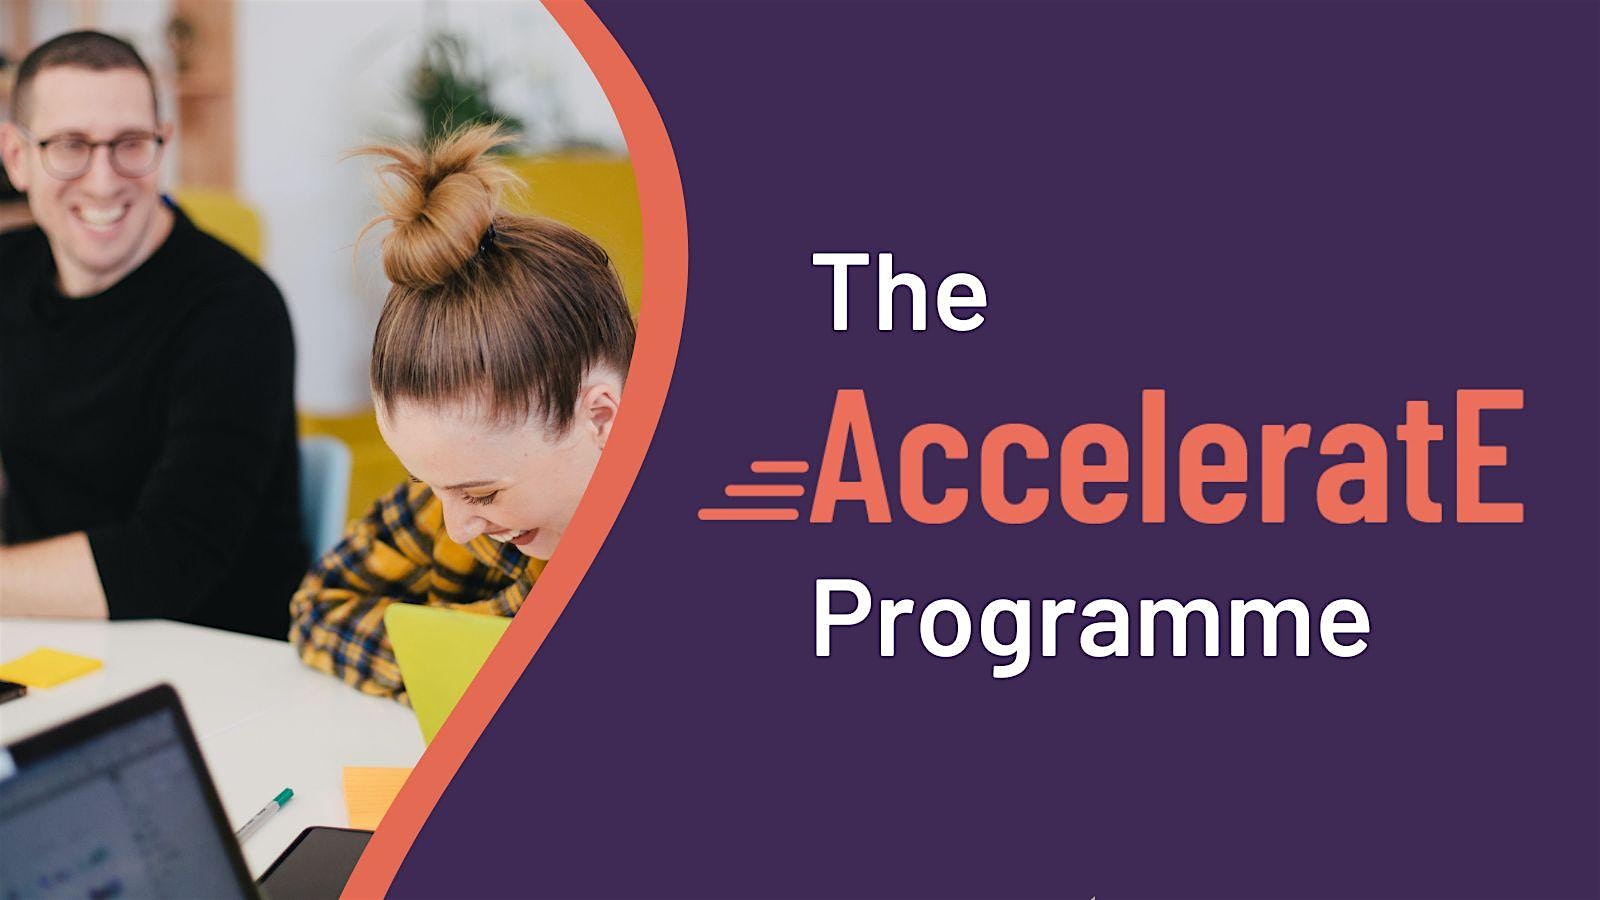 The AcceleratE Programme image